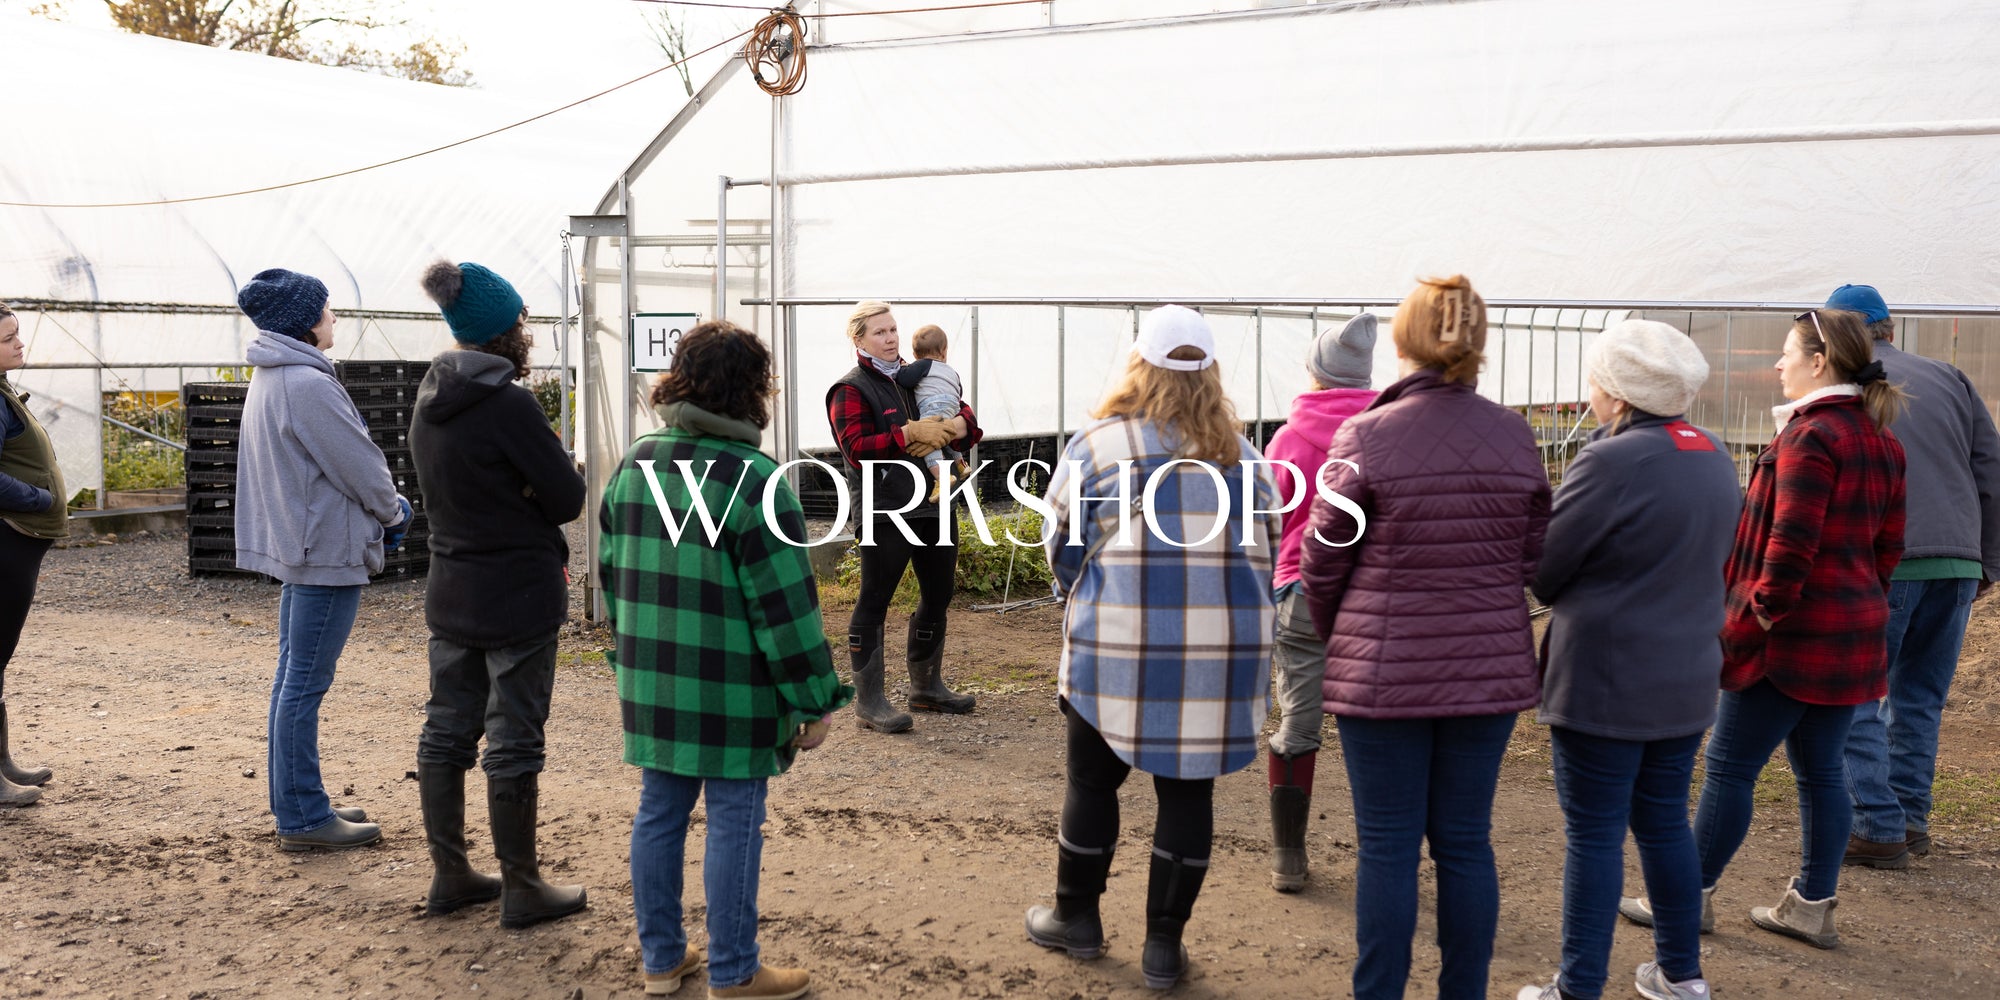 ON FARM WORKSHOPS AT ROOTED FLOWERS